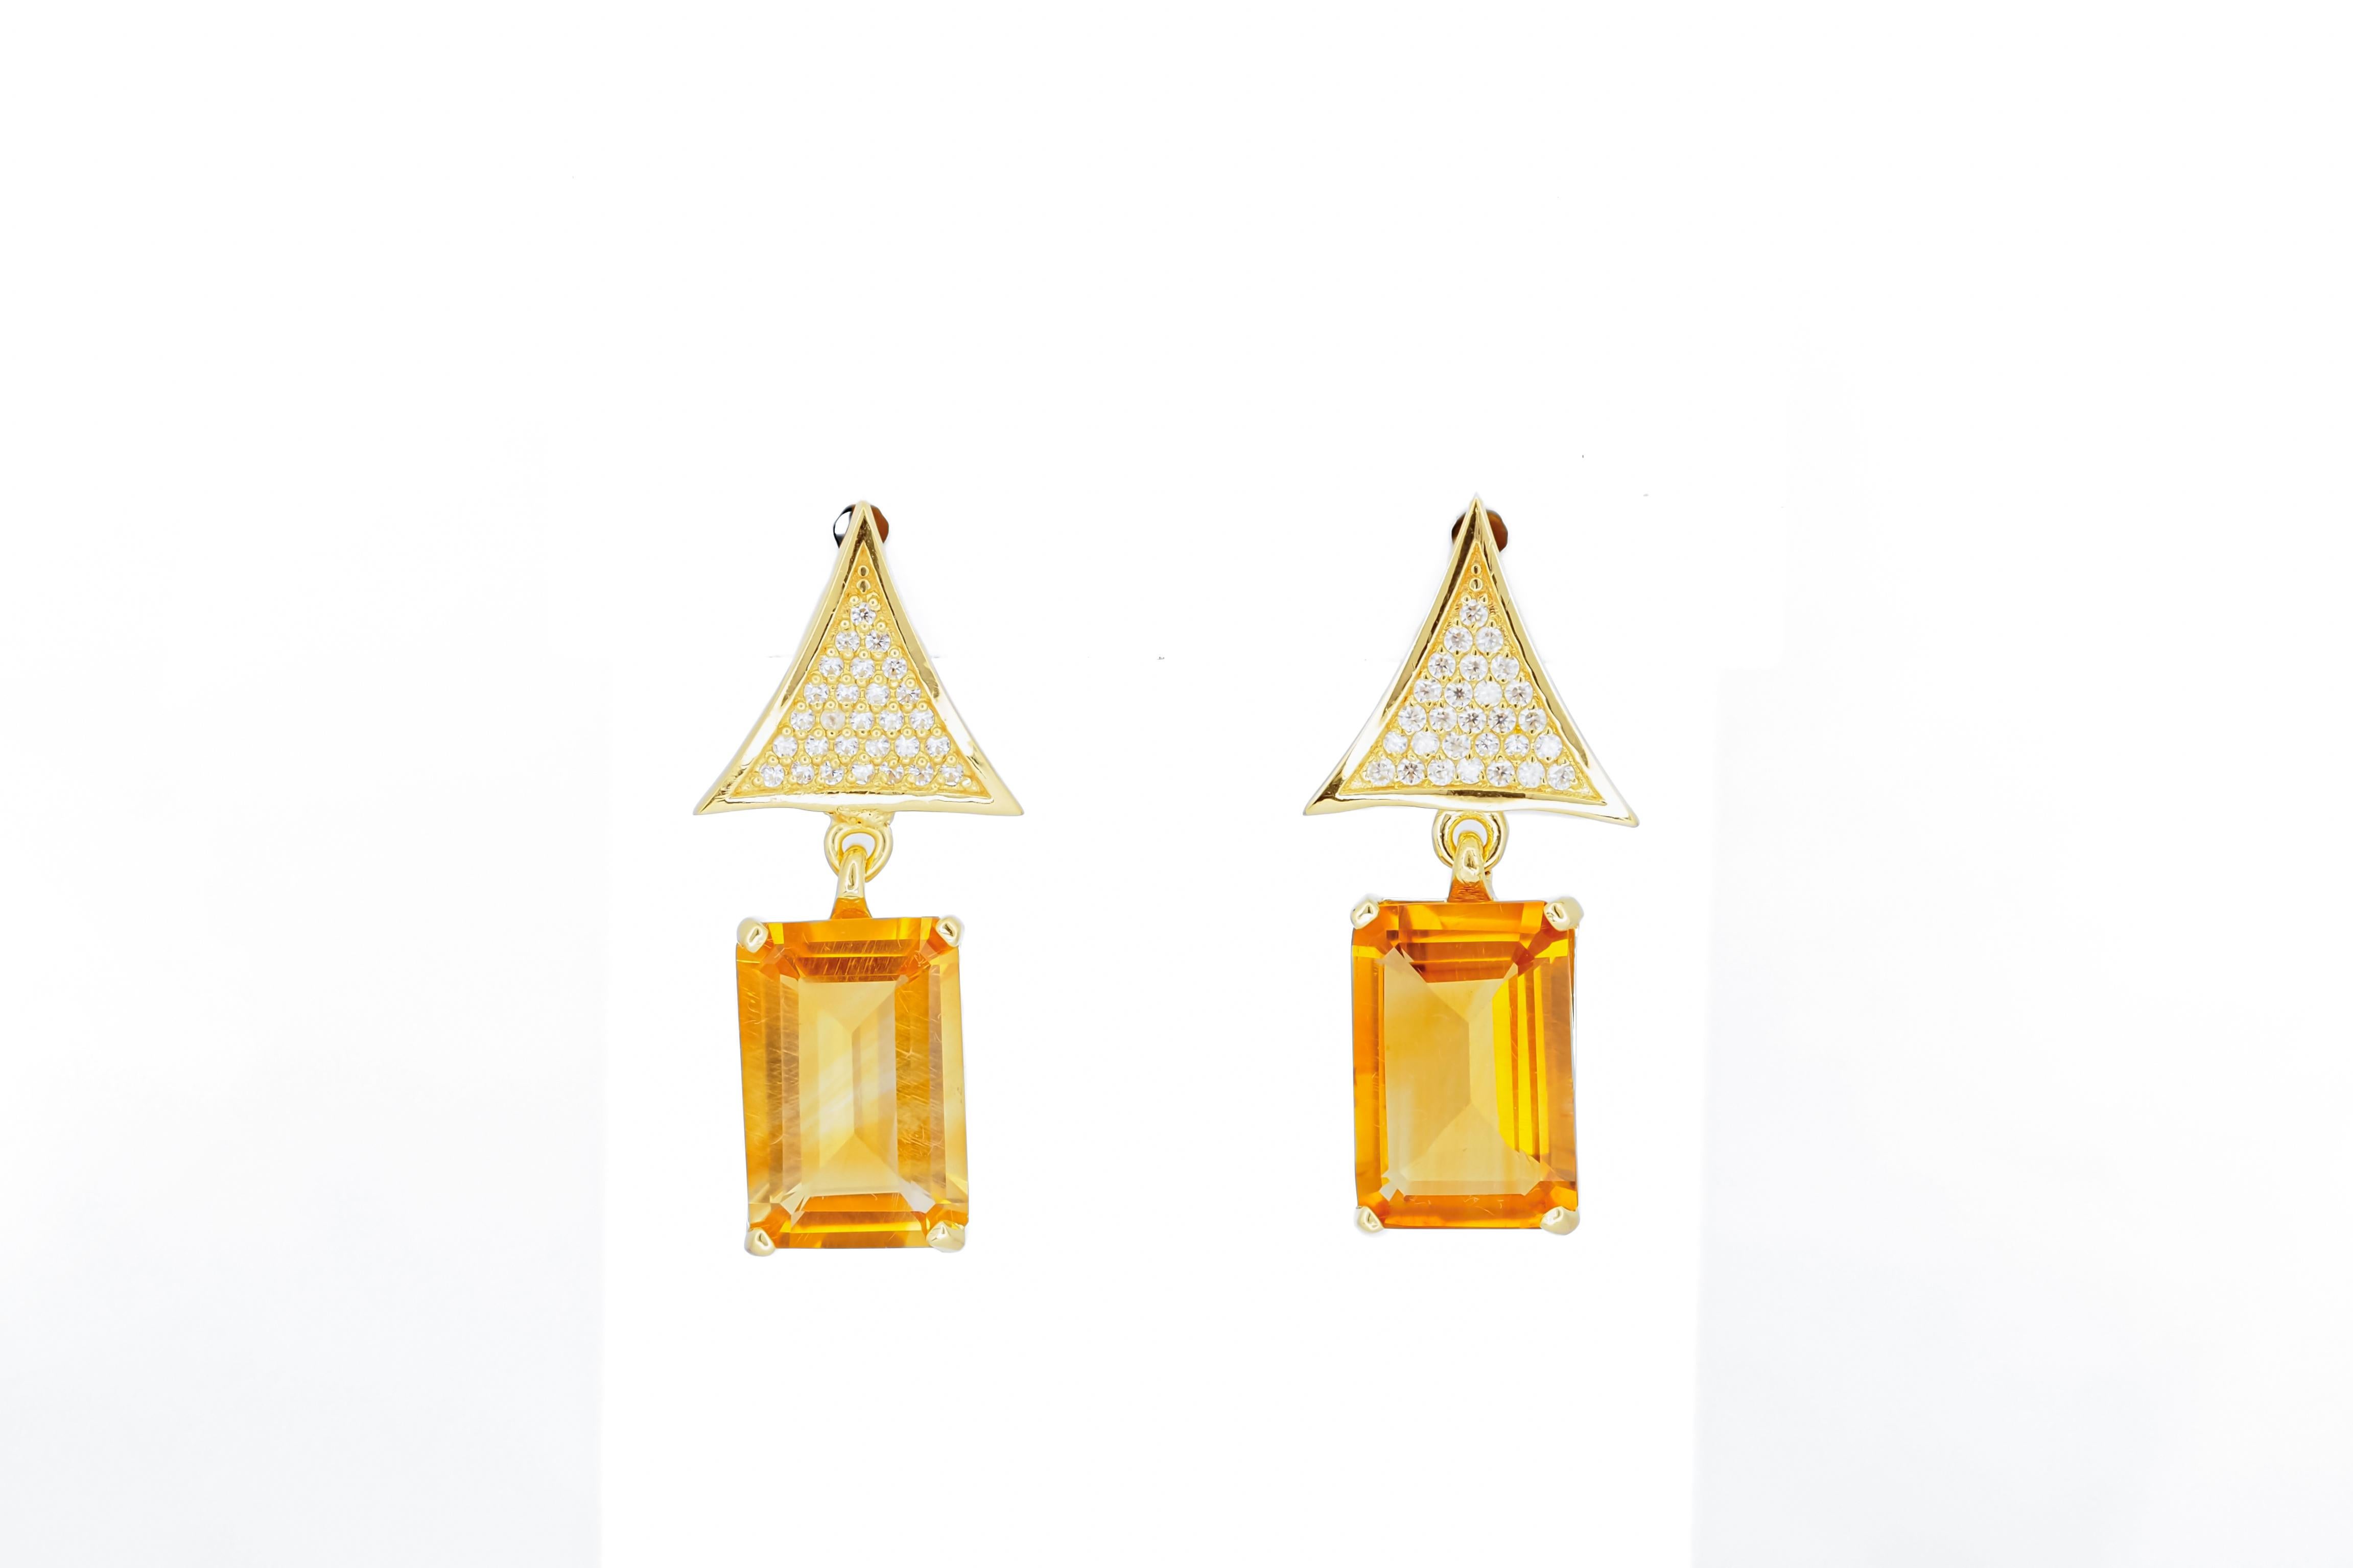 Citrine silver earrings studs. Citrine statement silver earrings. Delicate citrine earrings studs. Triangle earrings.

Metal: 925 silver with 14k gold covering
weight: 4 gr
Earrings size: 23x11 mm

Set with citrines, color - yellow 
Emerald cut, apx